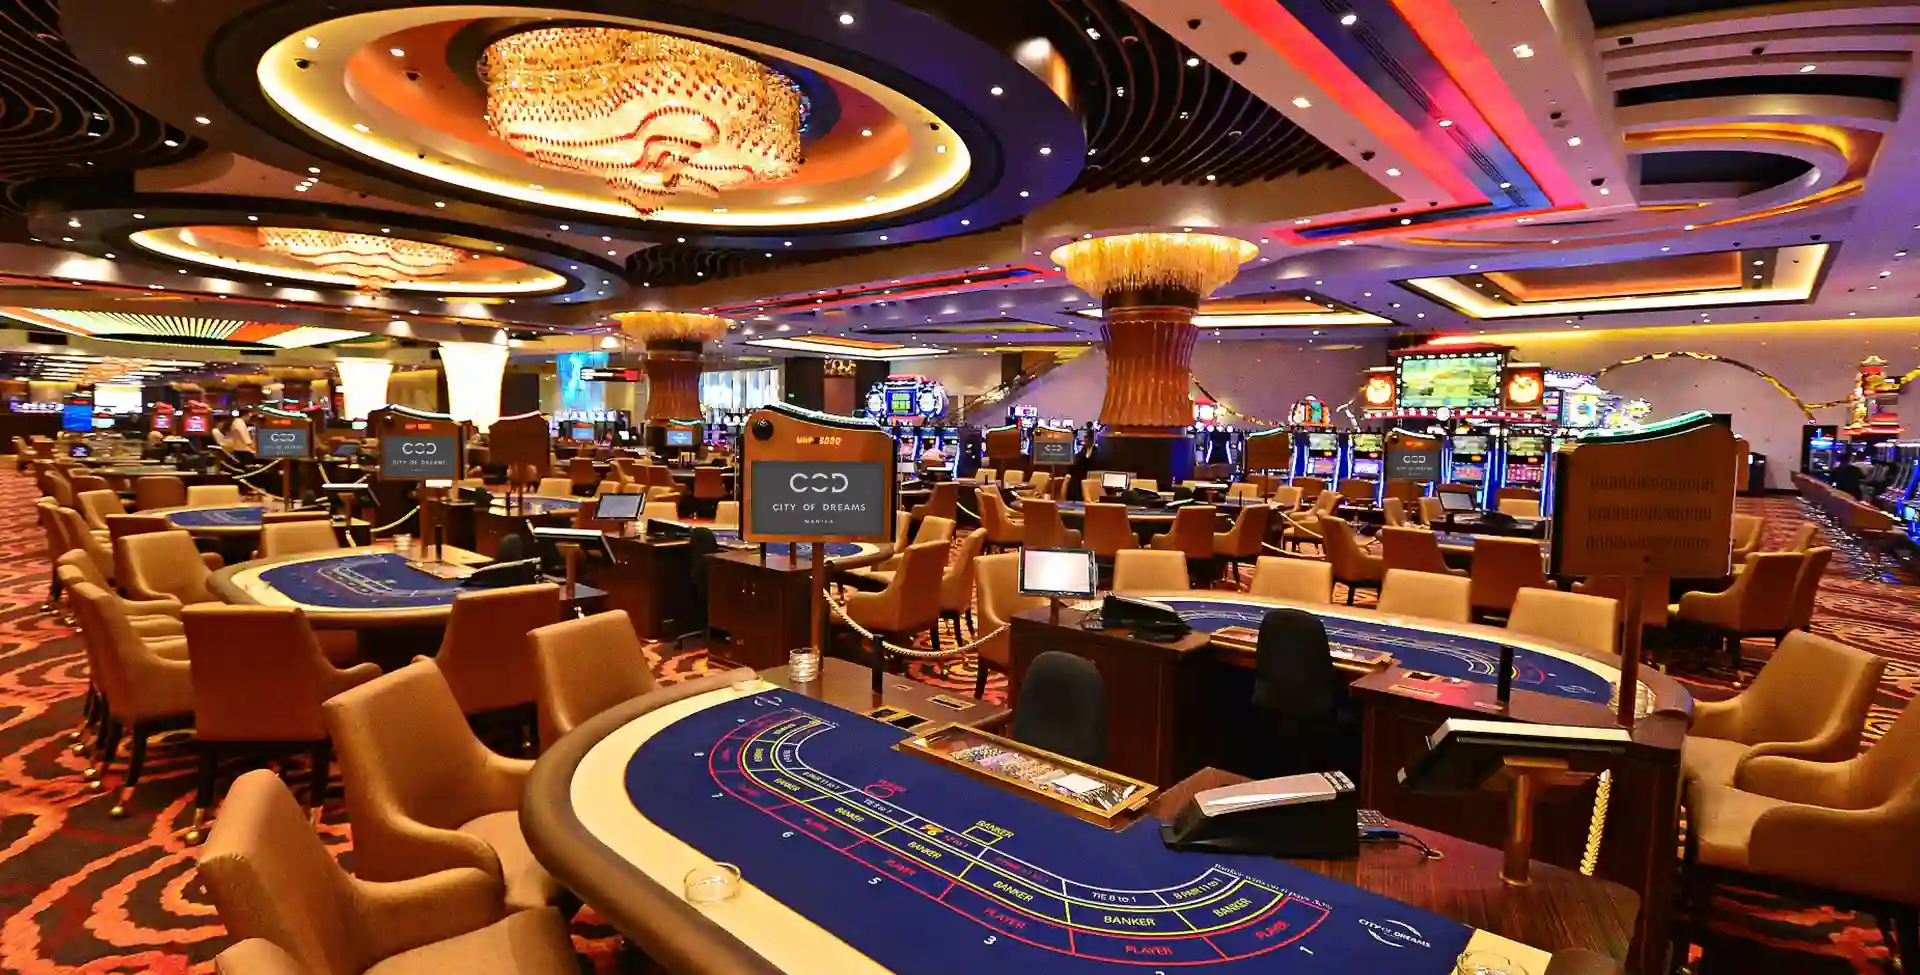 A well-liked casino game is roulette.